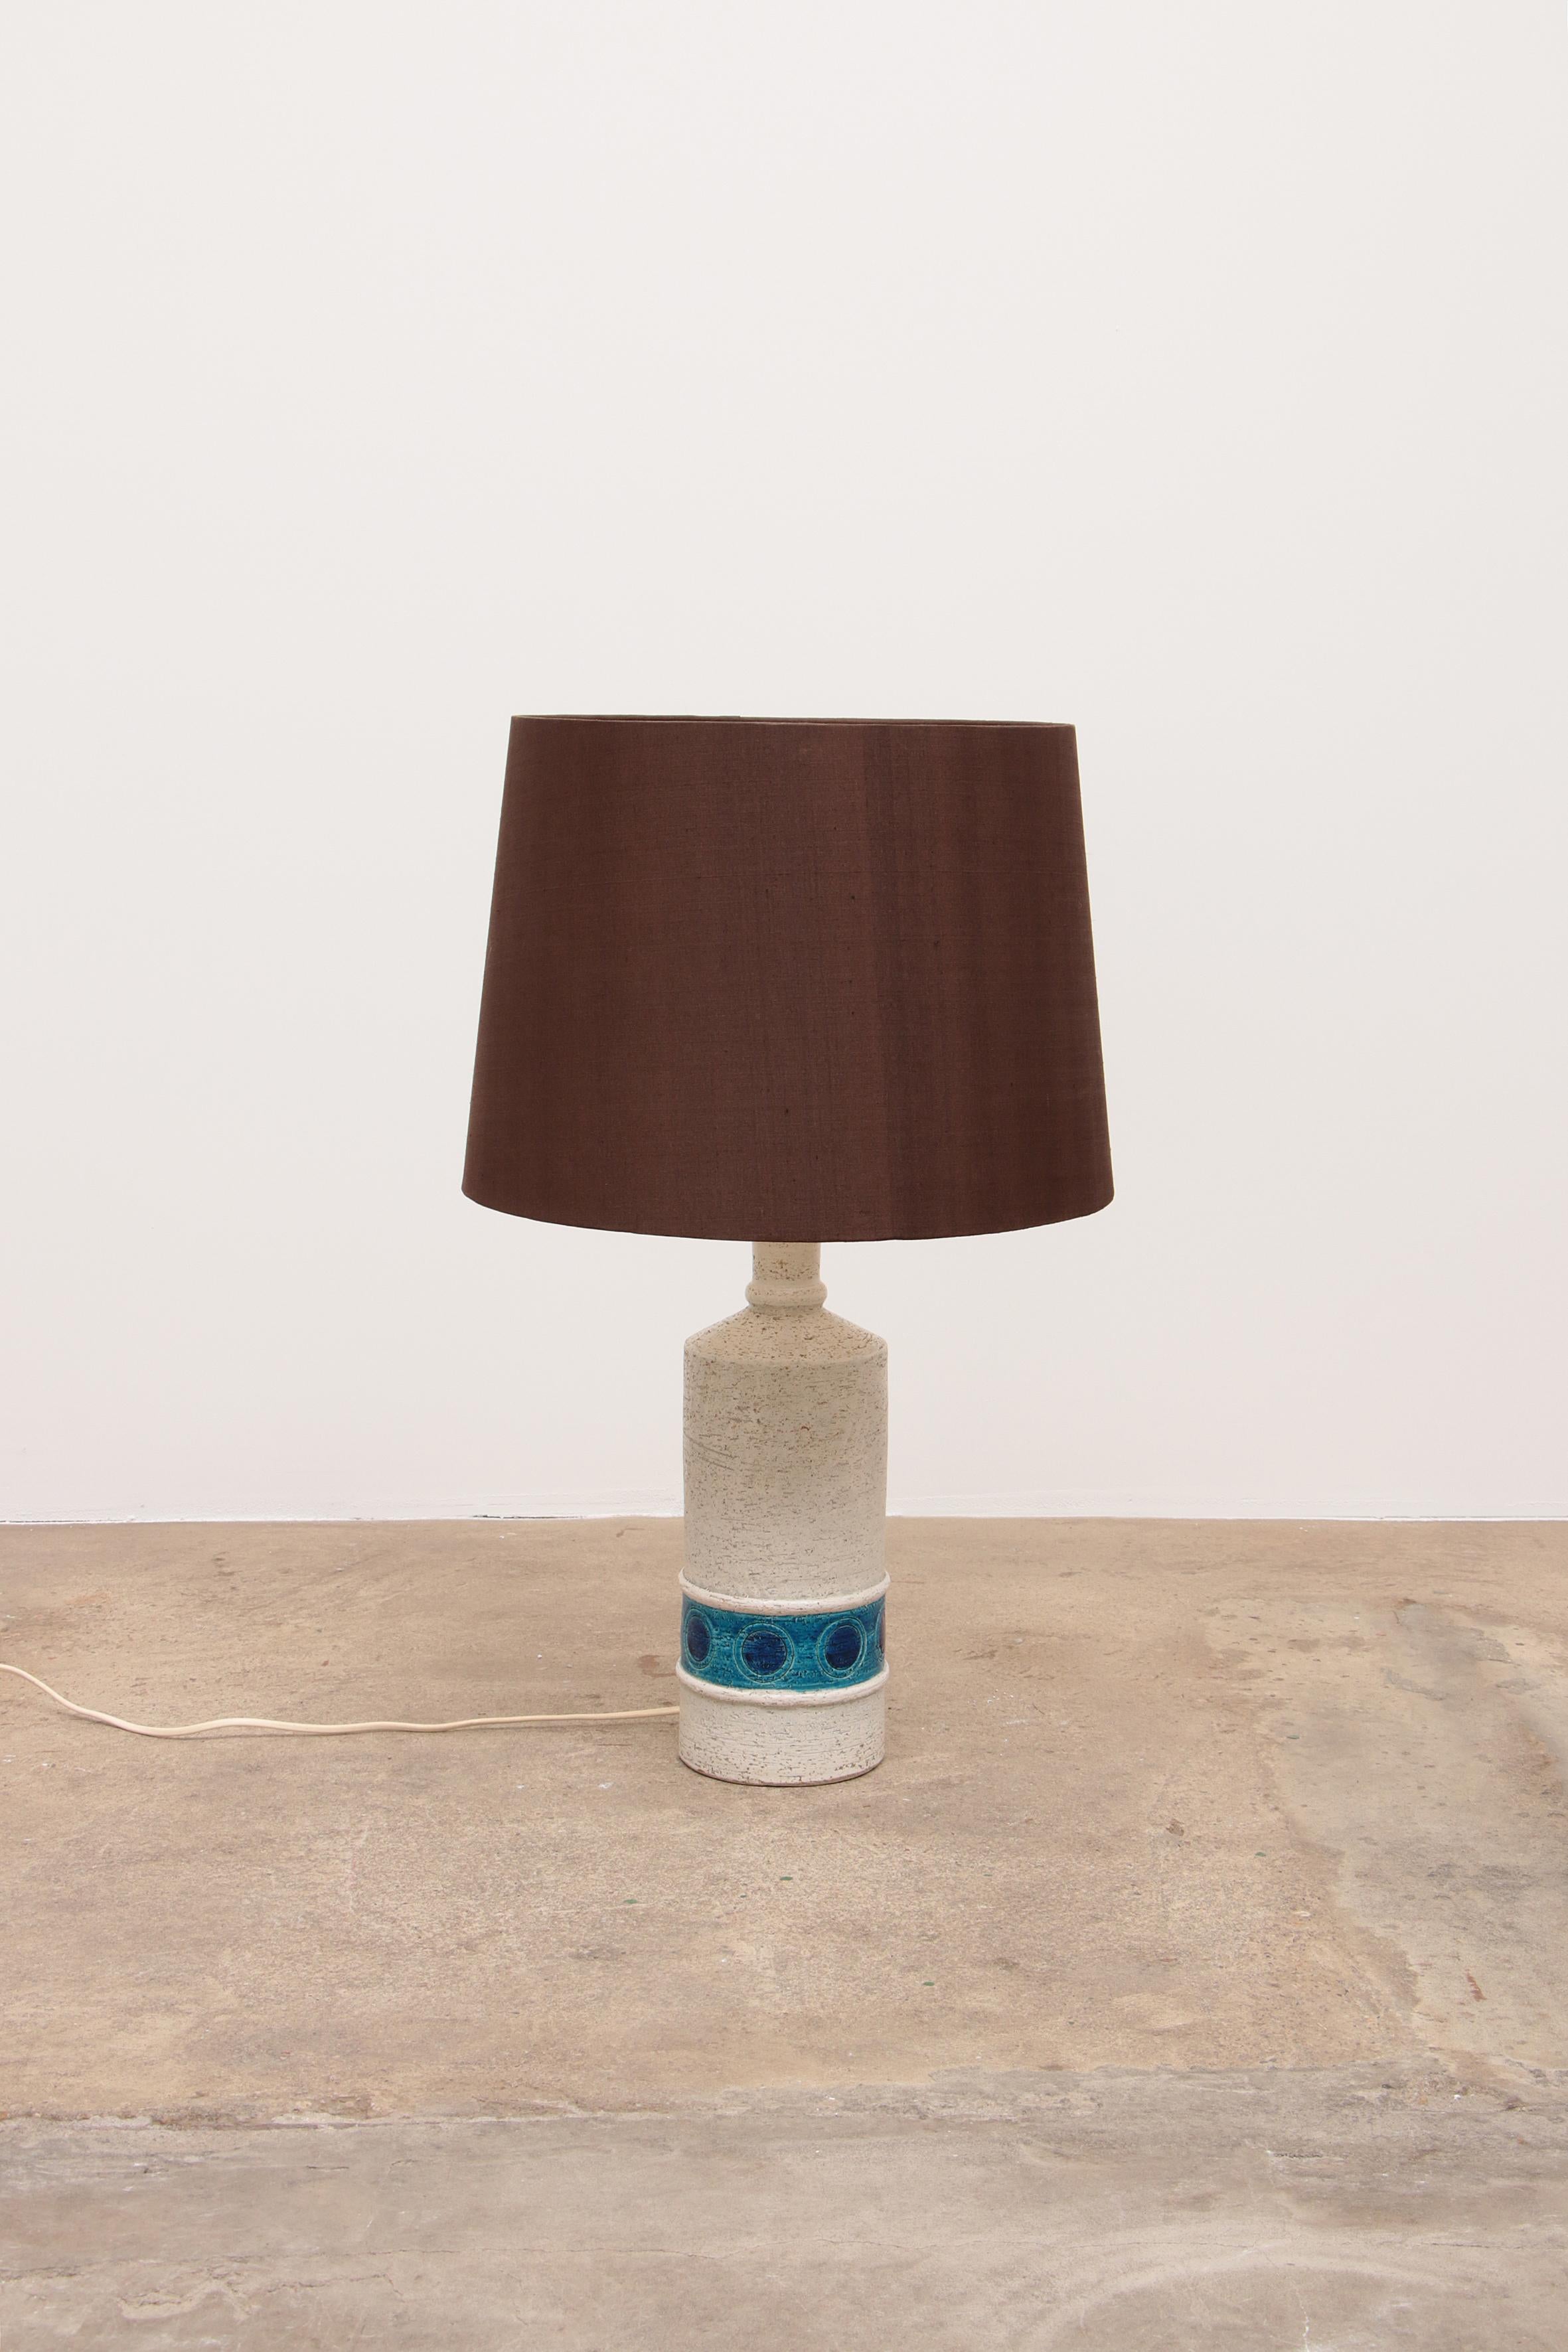 XL Bitossi lamp by Aldo Londi for Bergboms in ceramic.
Very nice condition.
Functionally works fine
Signed under the base.
Sold with lampshade.

circa: 1960 Measures: Height: 38 cm diameter: 15 cm

Sustainable: environmentally conscious By